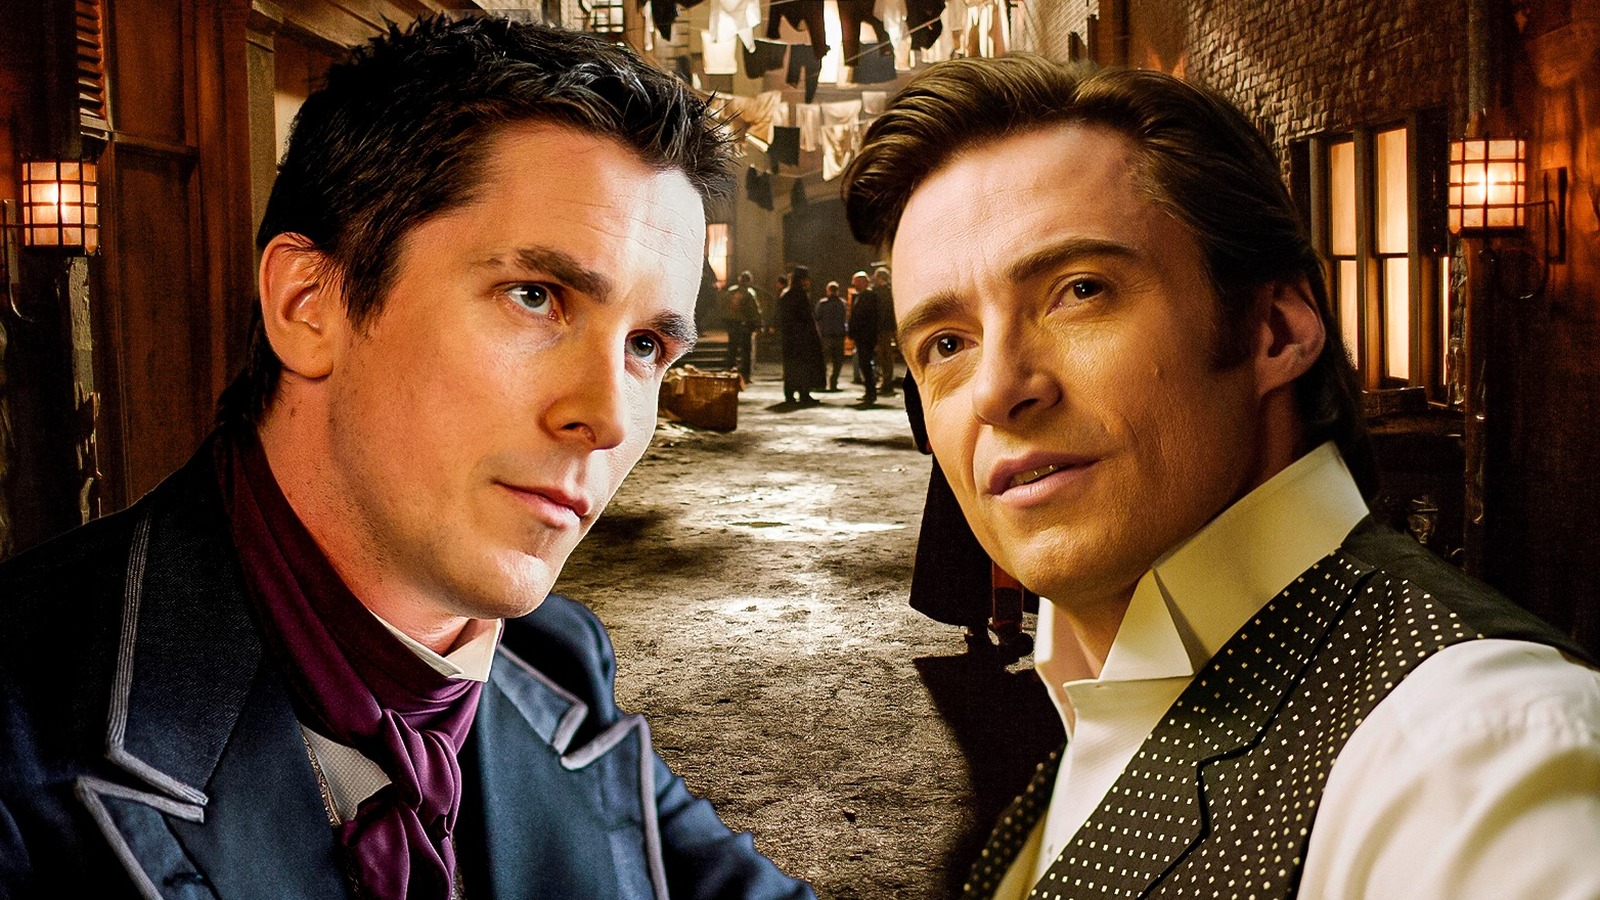 Christopher Nolan's The Prestige Looks at the Obsession Behind the Curtain  - IGN